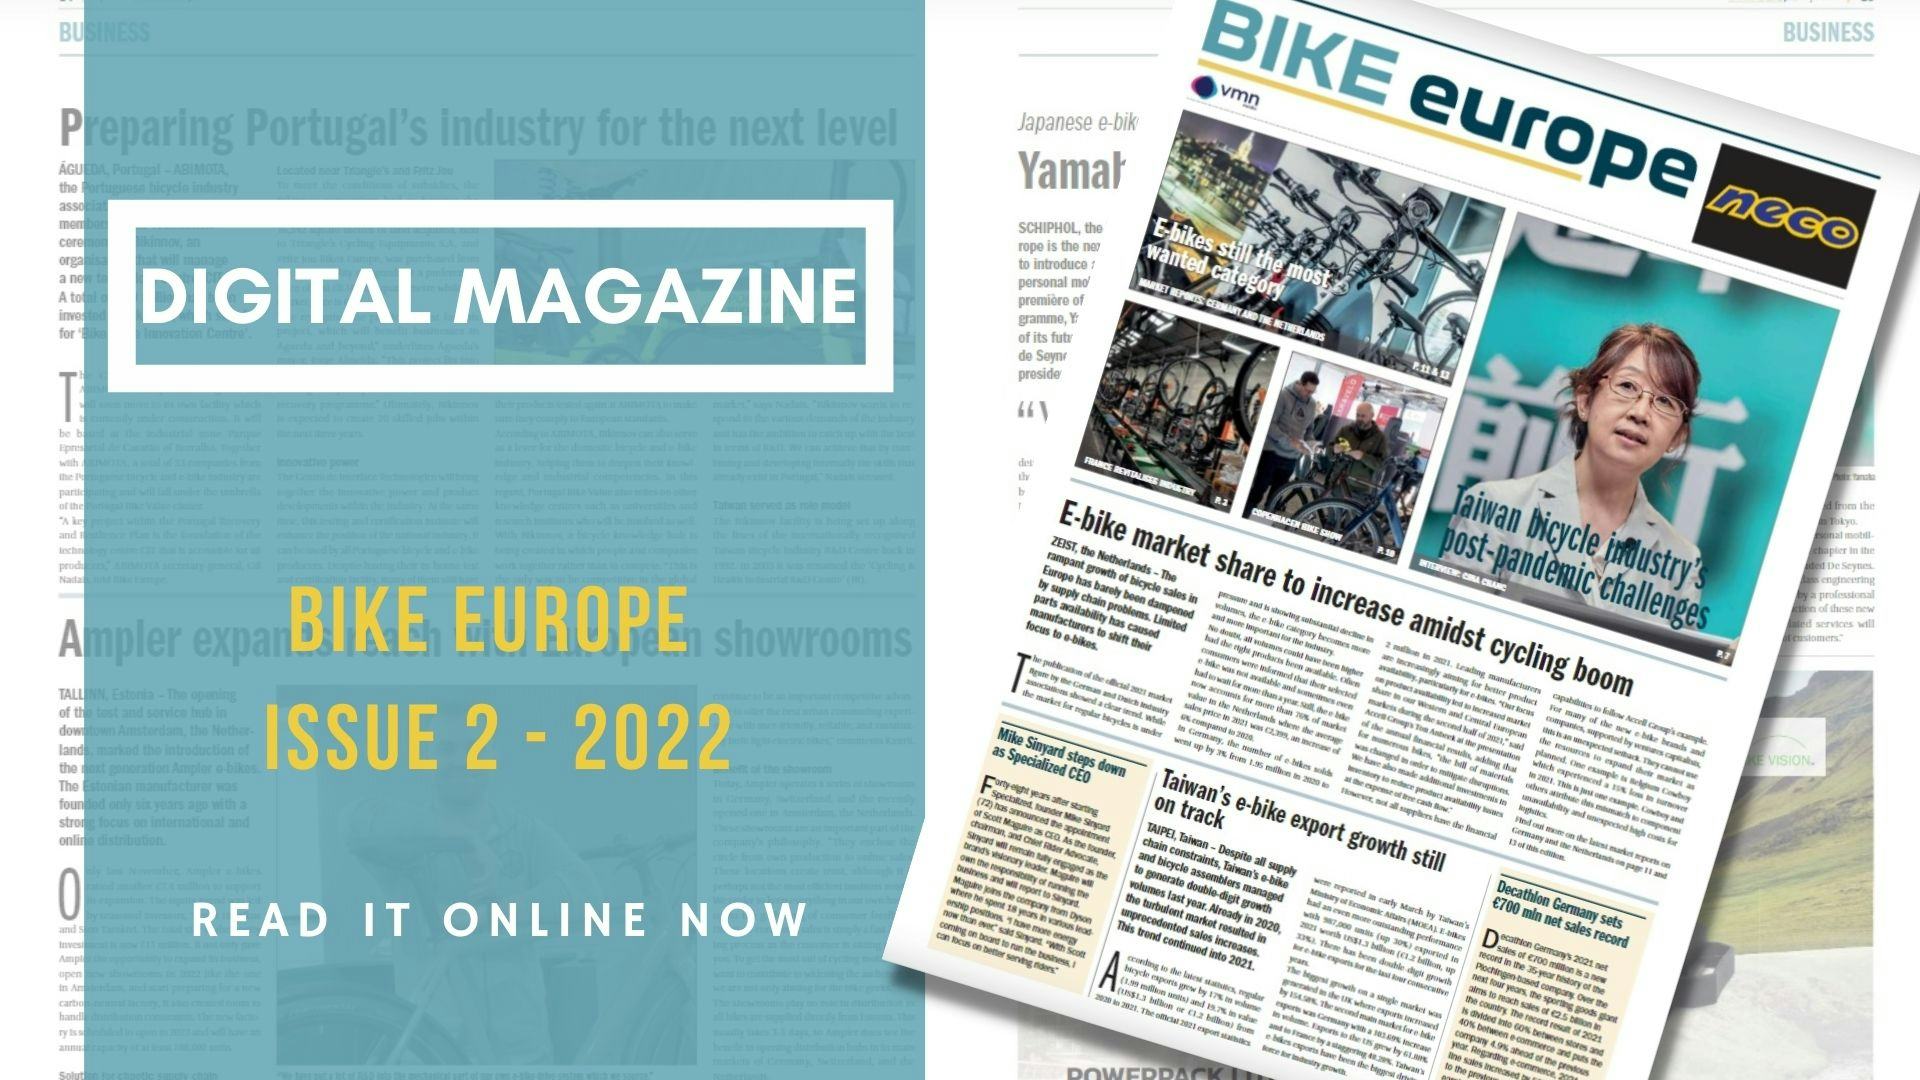 Bike Europe issue 2/2022 available online now